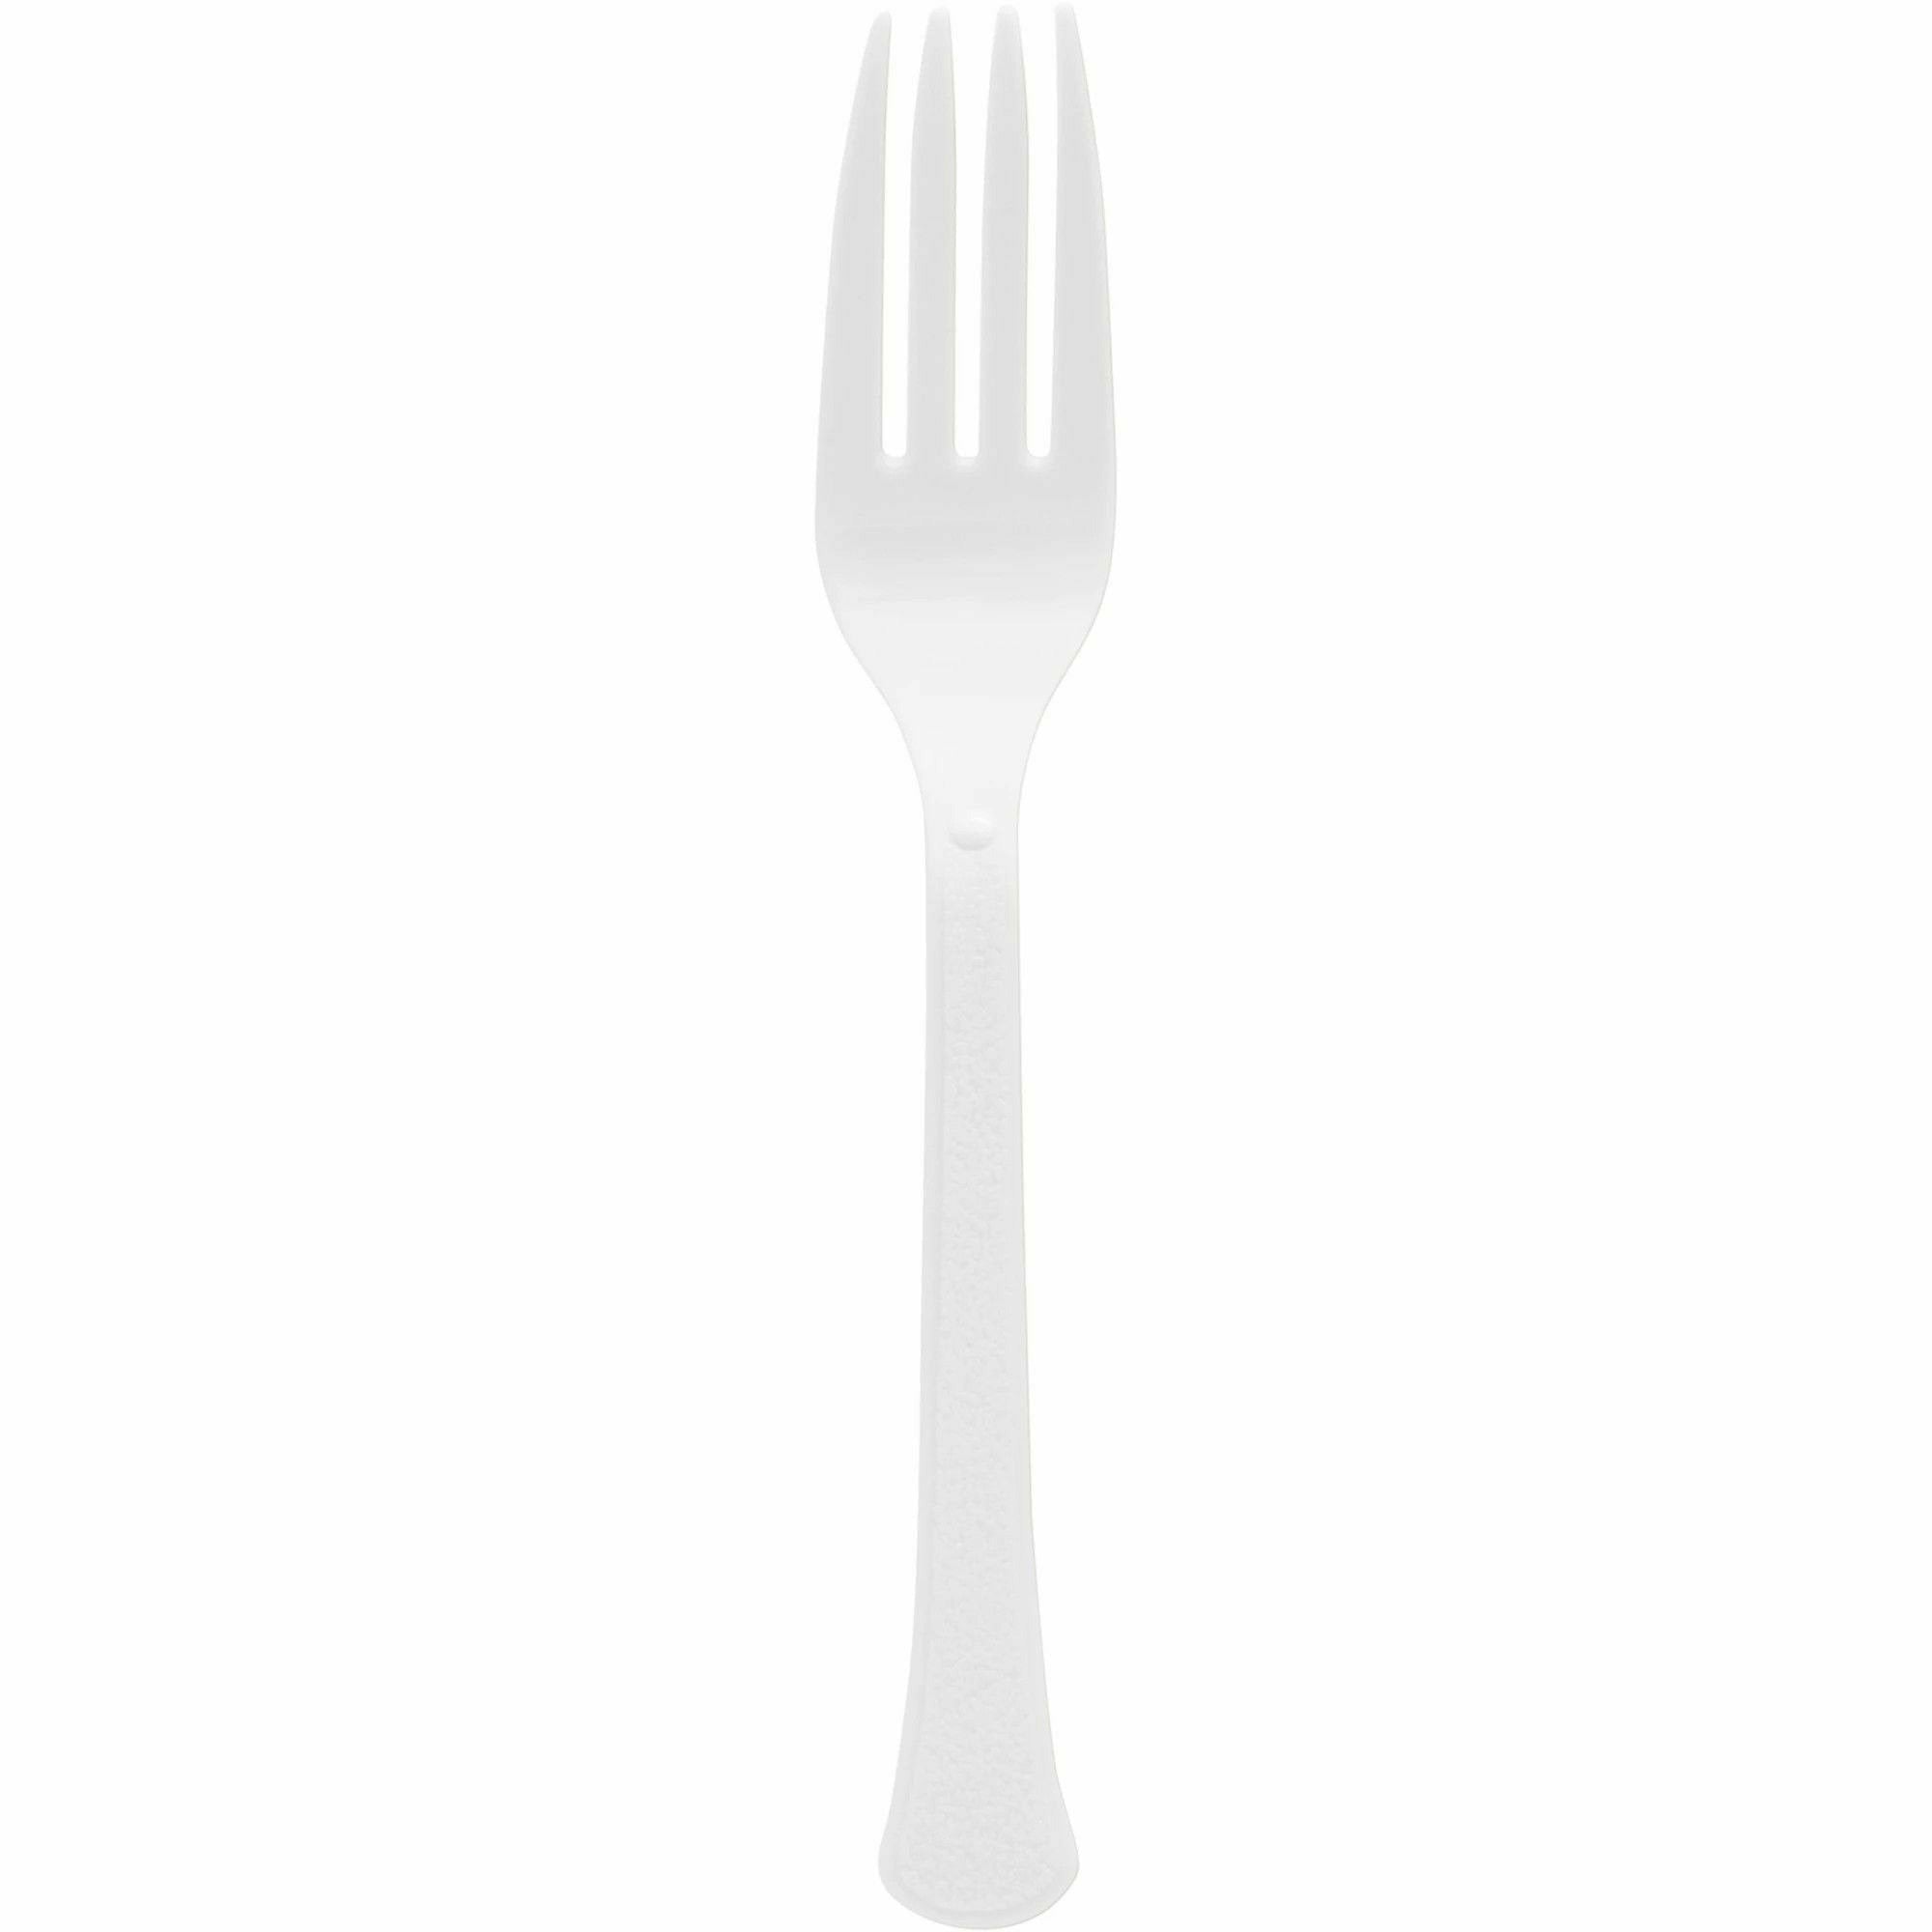 Amscan BASIC Frosted White - Boxed, Heavy Weight Forks, 20 Ct.